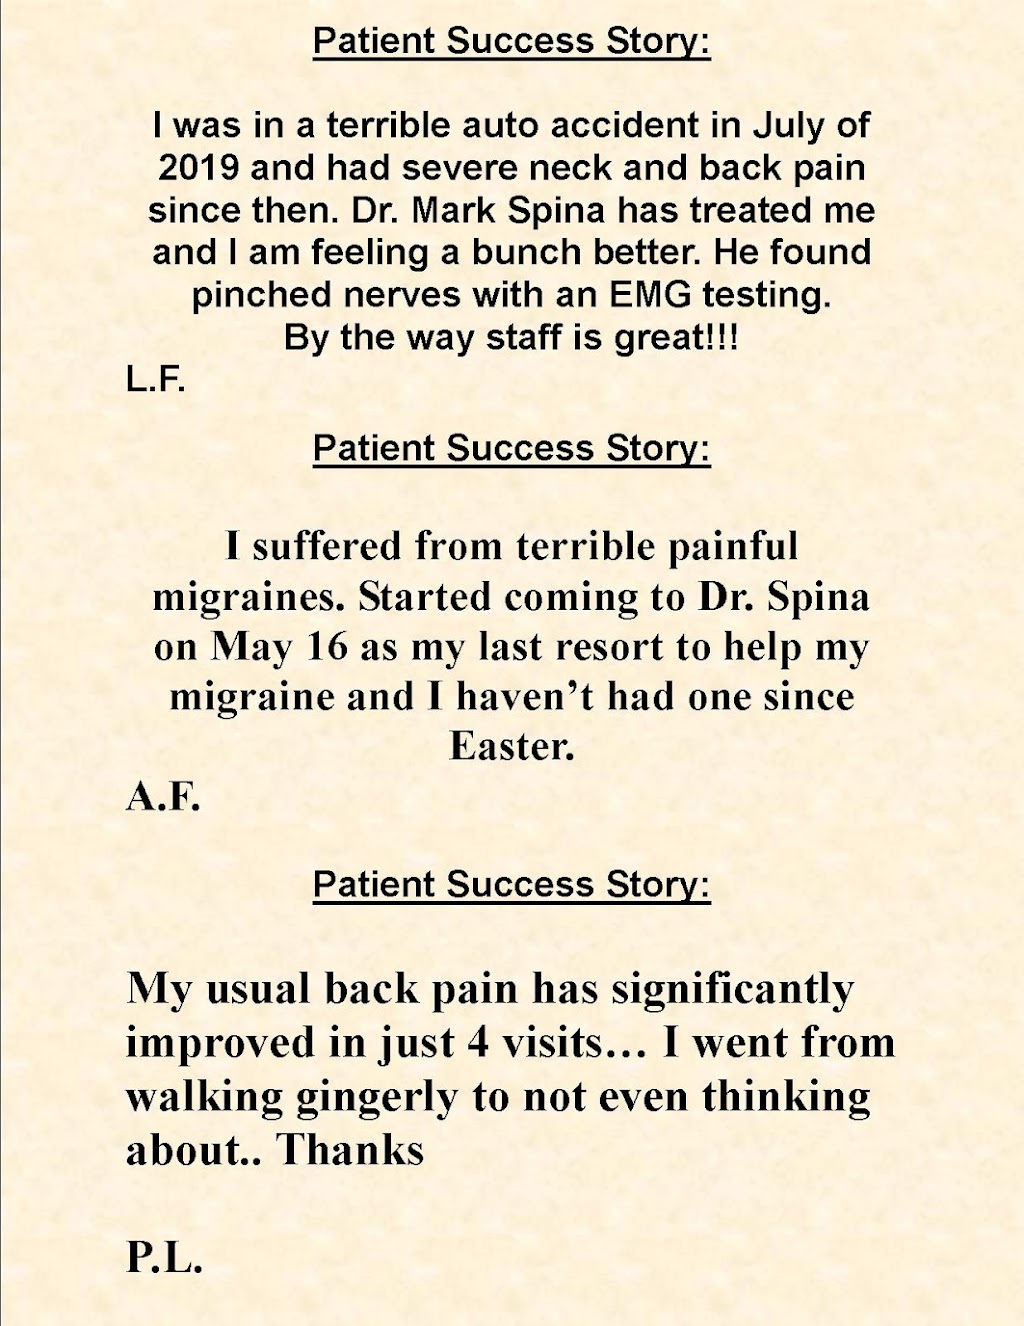 Spina Chiropractic Office: Dr. Mark Spina, DC | 21 Mill St, Liberty, NY 12754 | Phone: (845) 292-8810